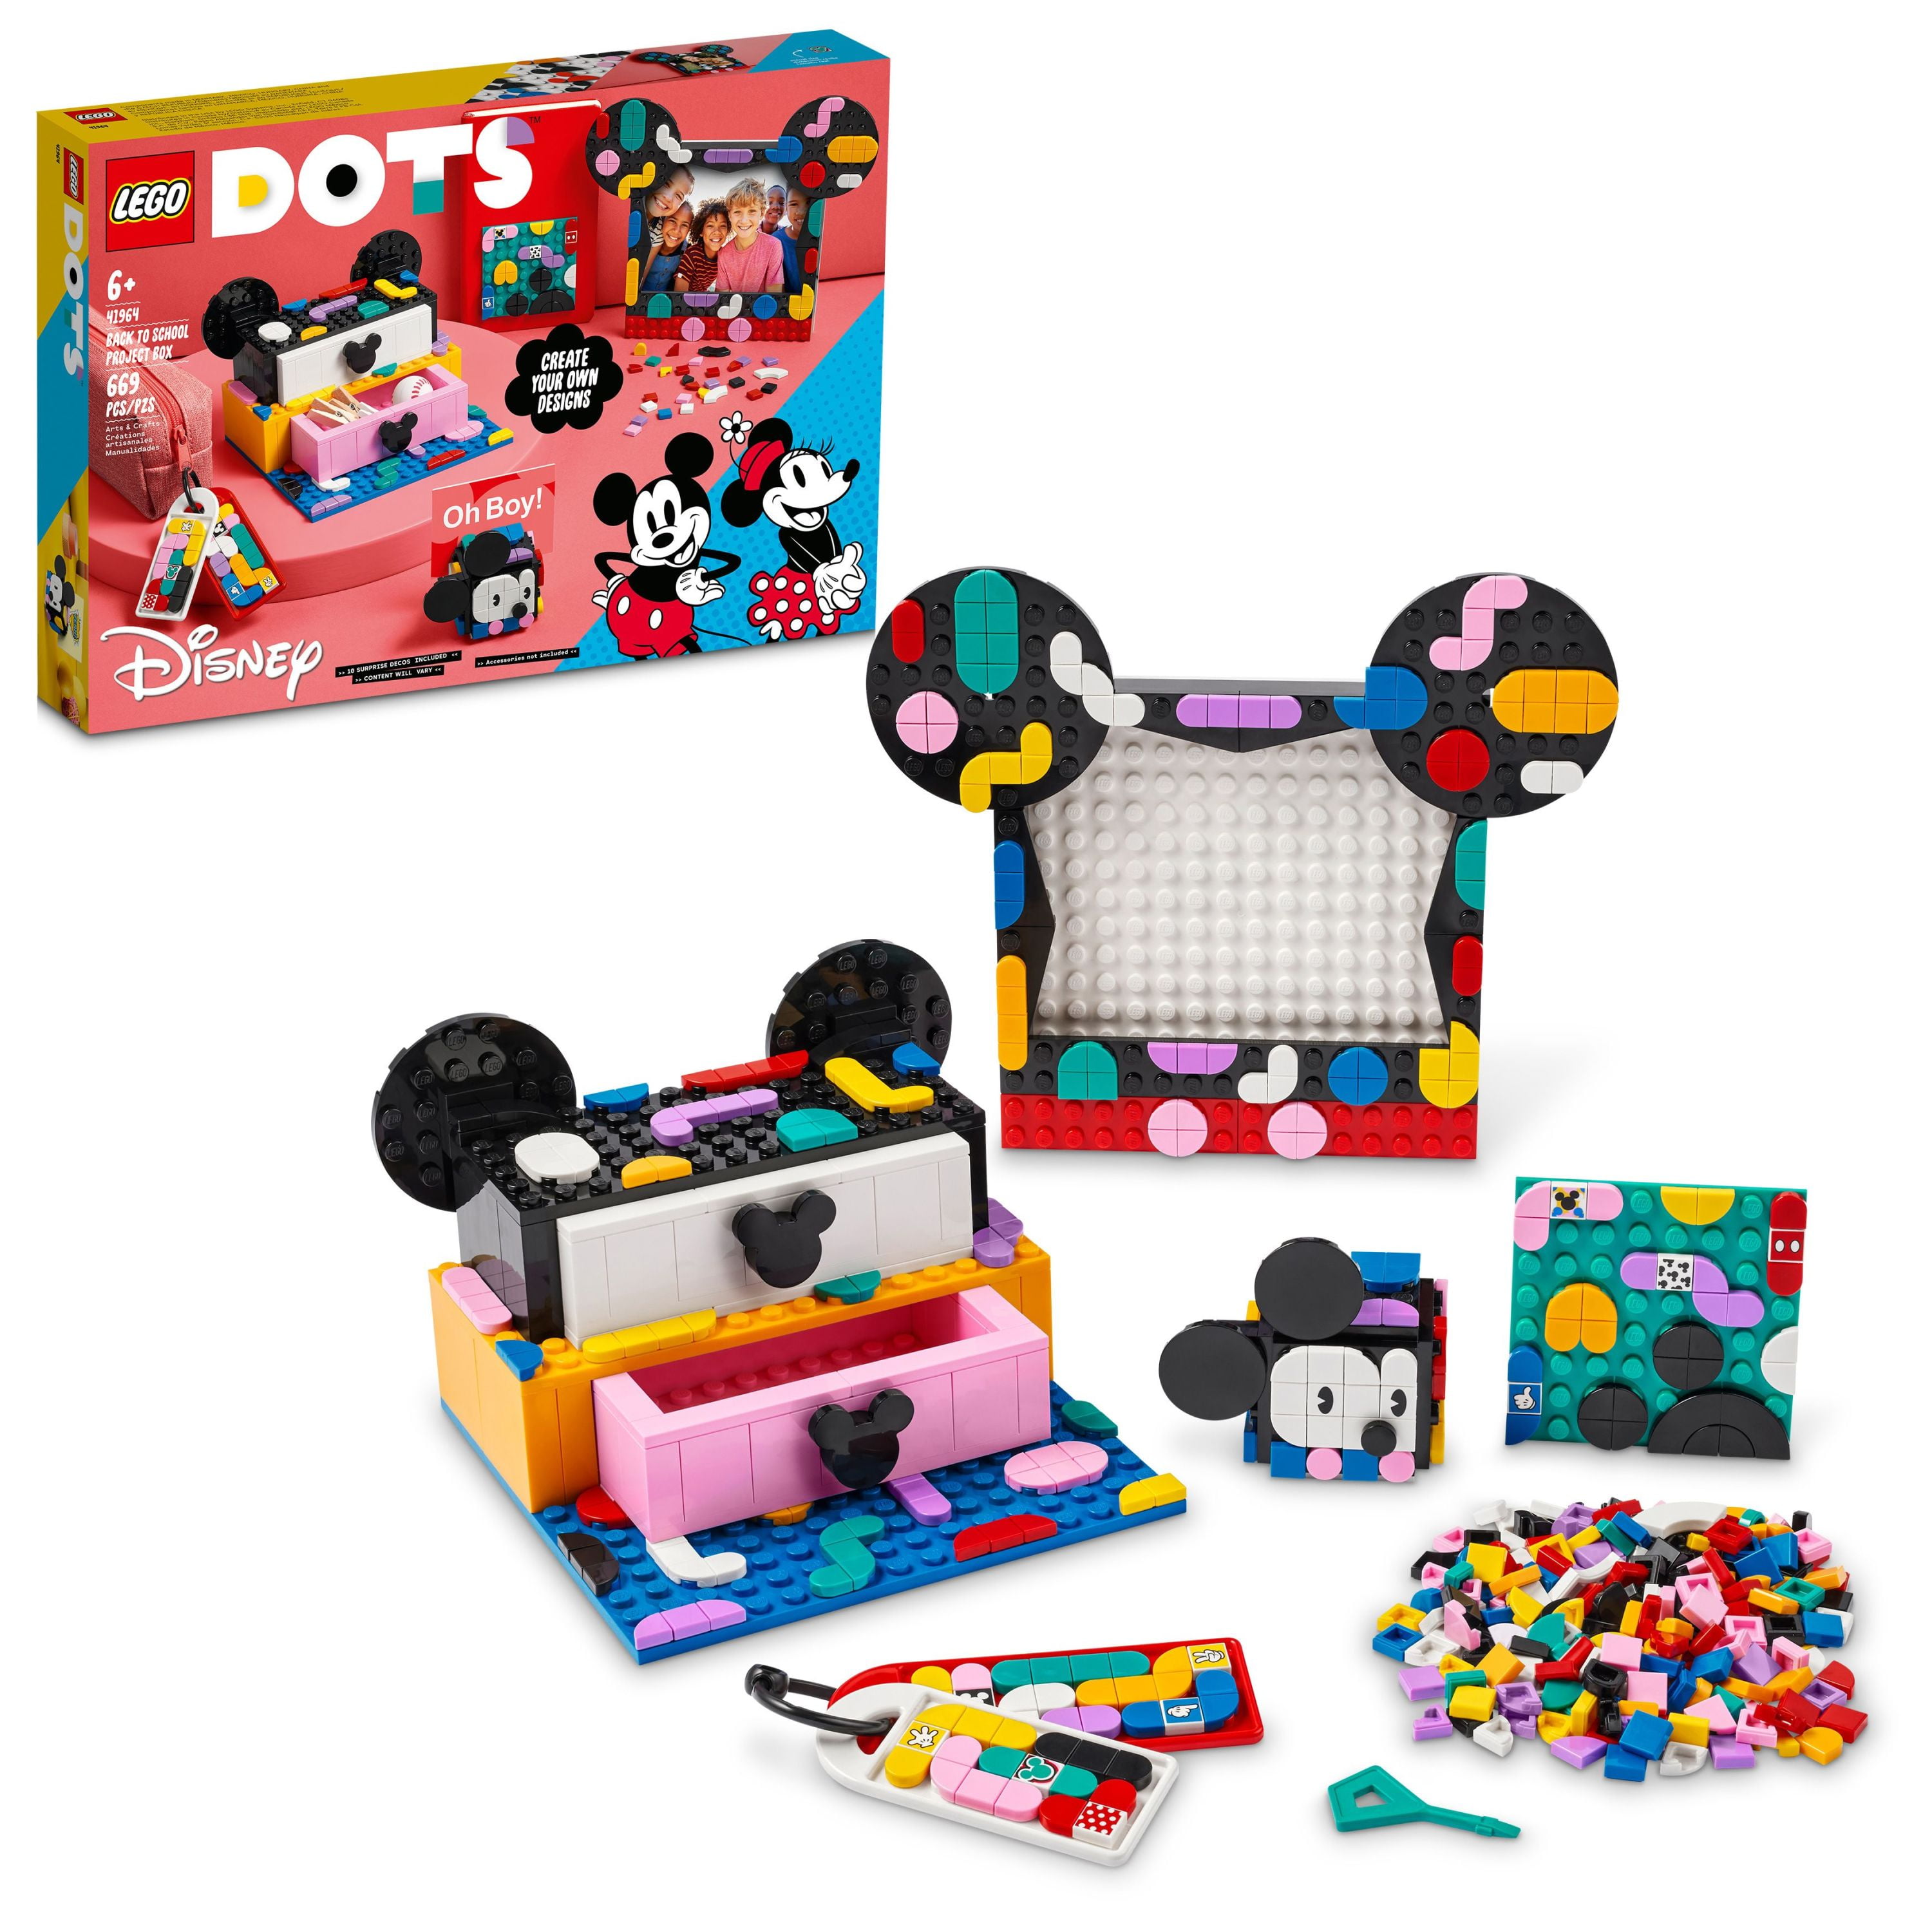 LEGO DOTS Disney Mickey & Minnie Mouse Back-to-School Project Box 41964, 6in1 Toy Crafts Set with Bag Tags, Sticker Patch and Desk Tidy, Gifts for Kids Aged 6 Plus